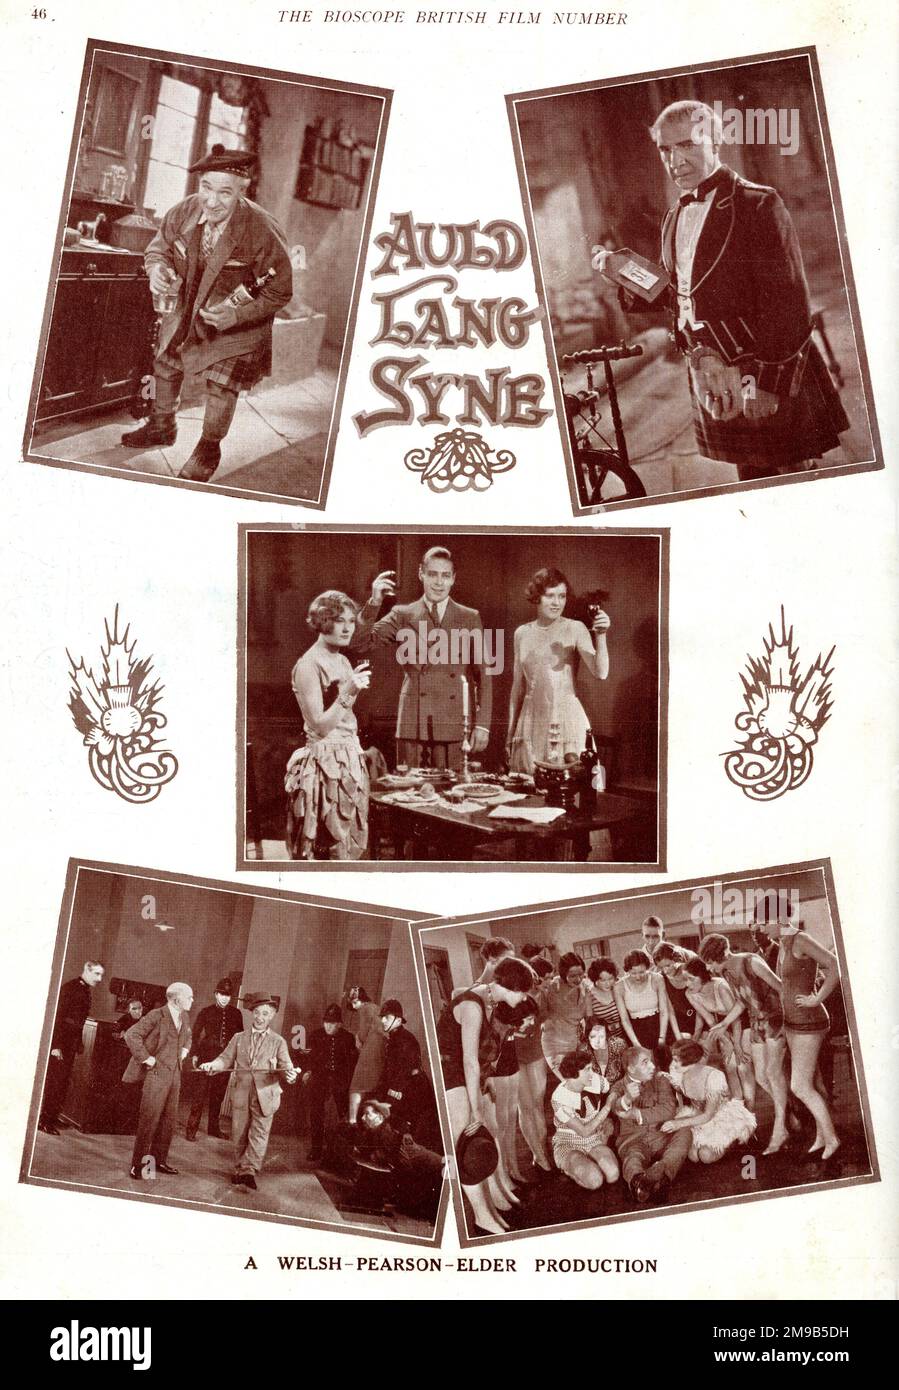 Scene del film Paramount Auld Lang Syne con Sir Harry Lauder Foto Stock